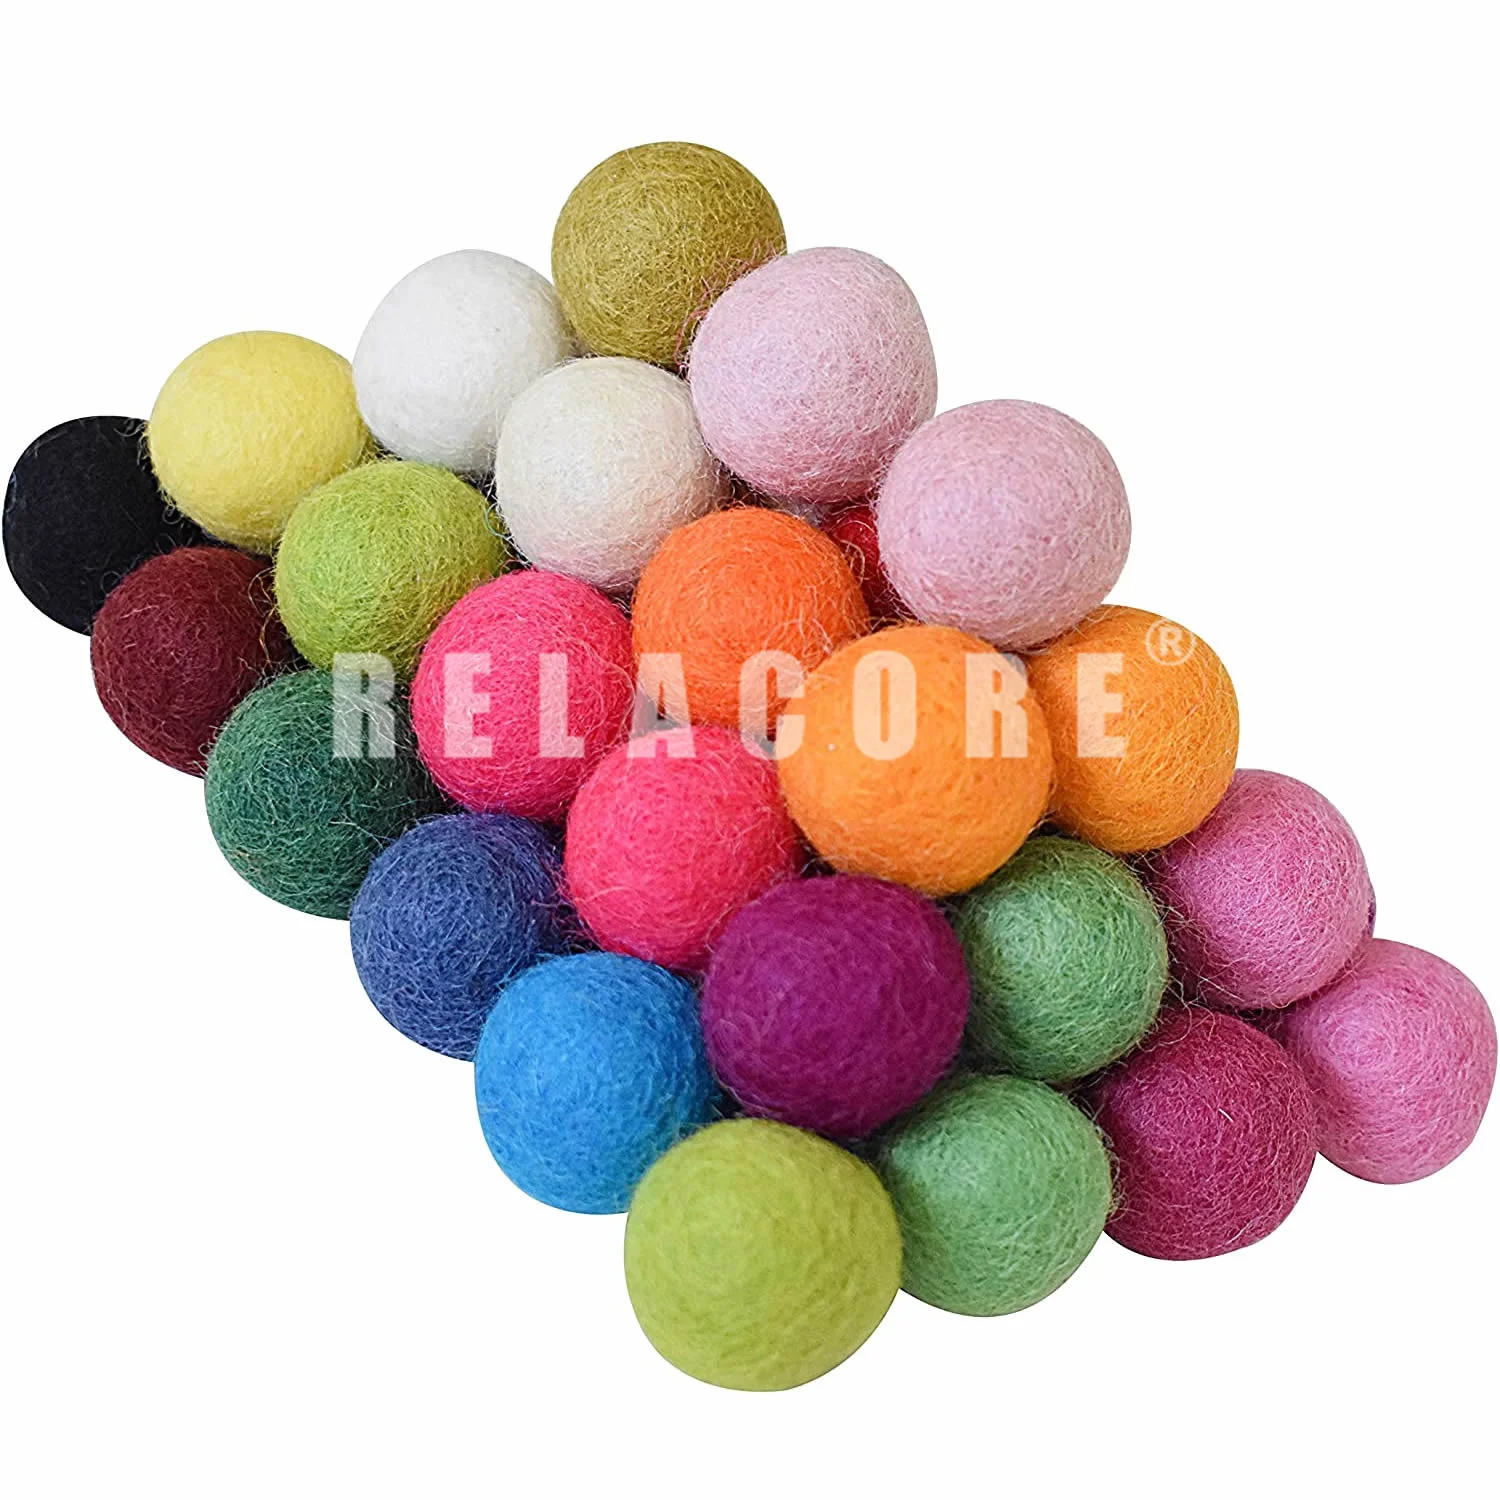 Wool Felt Balls - 50 Pieces, Hand-Felted Wool Pom Poms, Pure Wool Beads